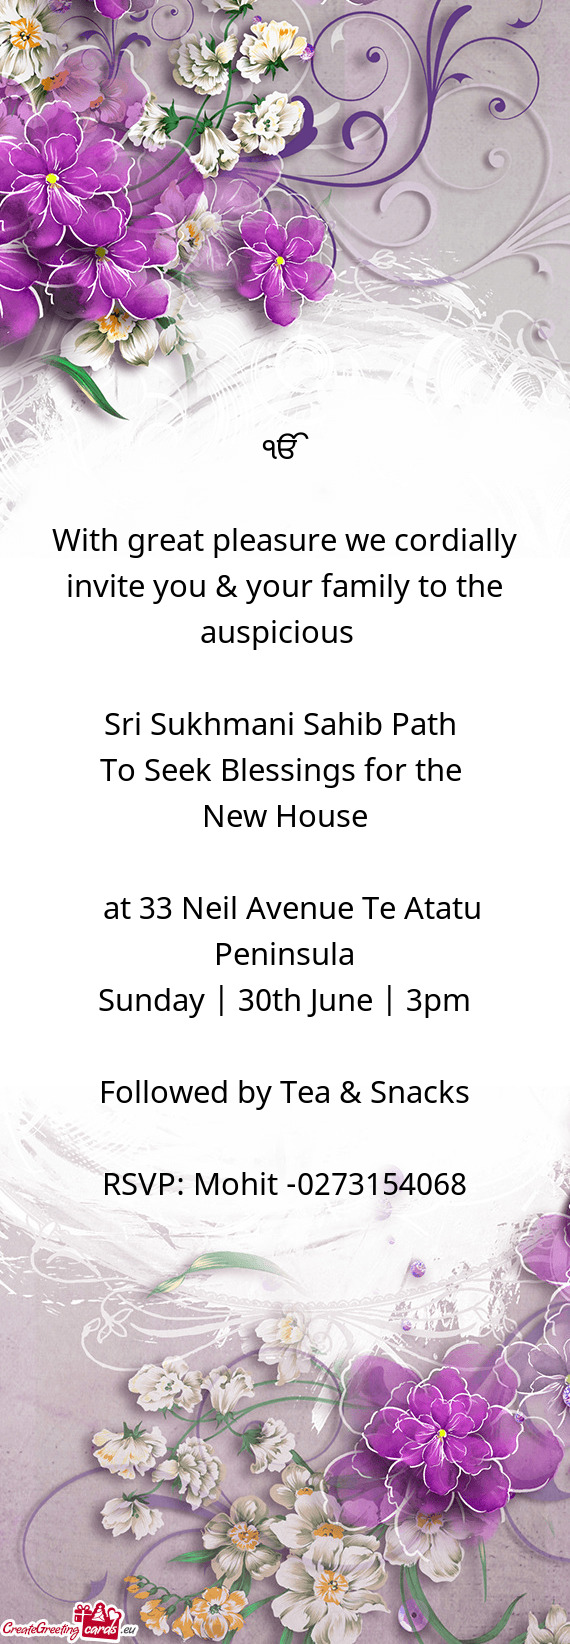 With great pleasure we cordially invite you & your family to the auspicious